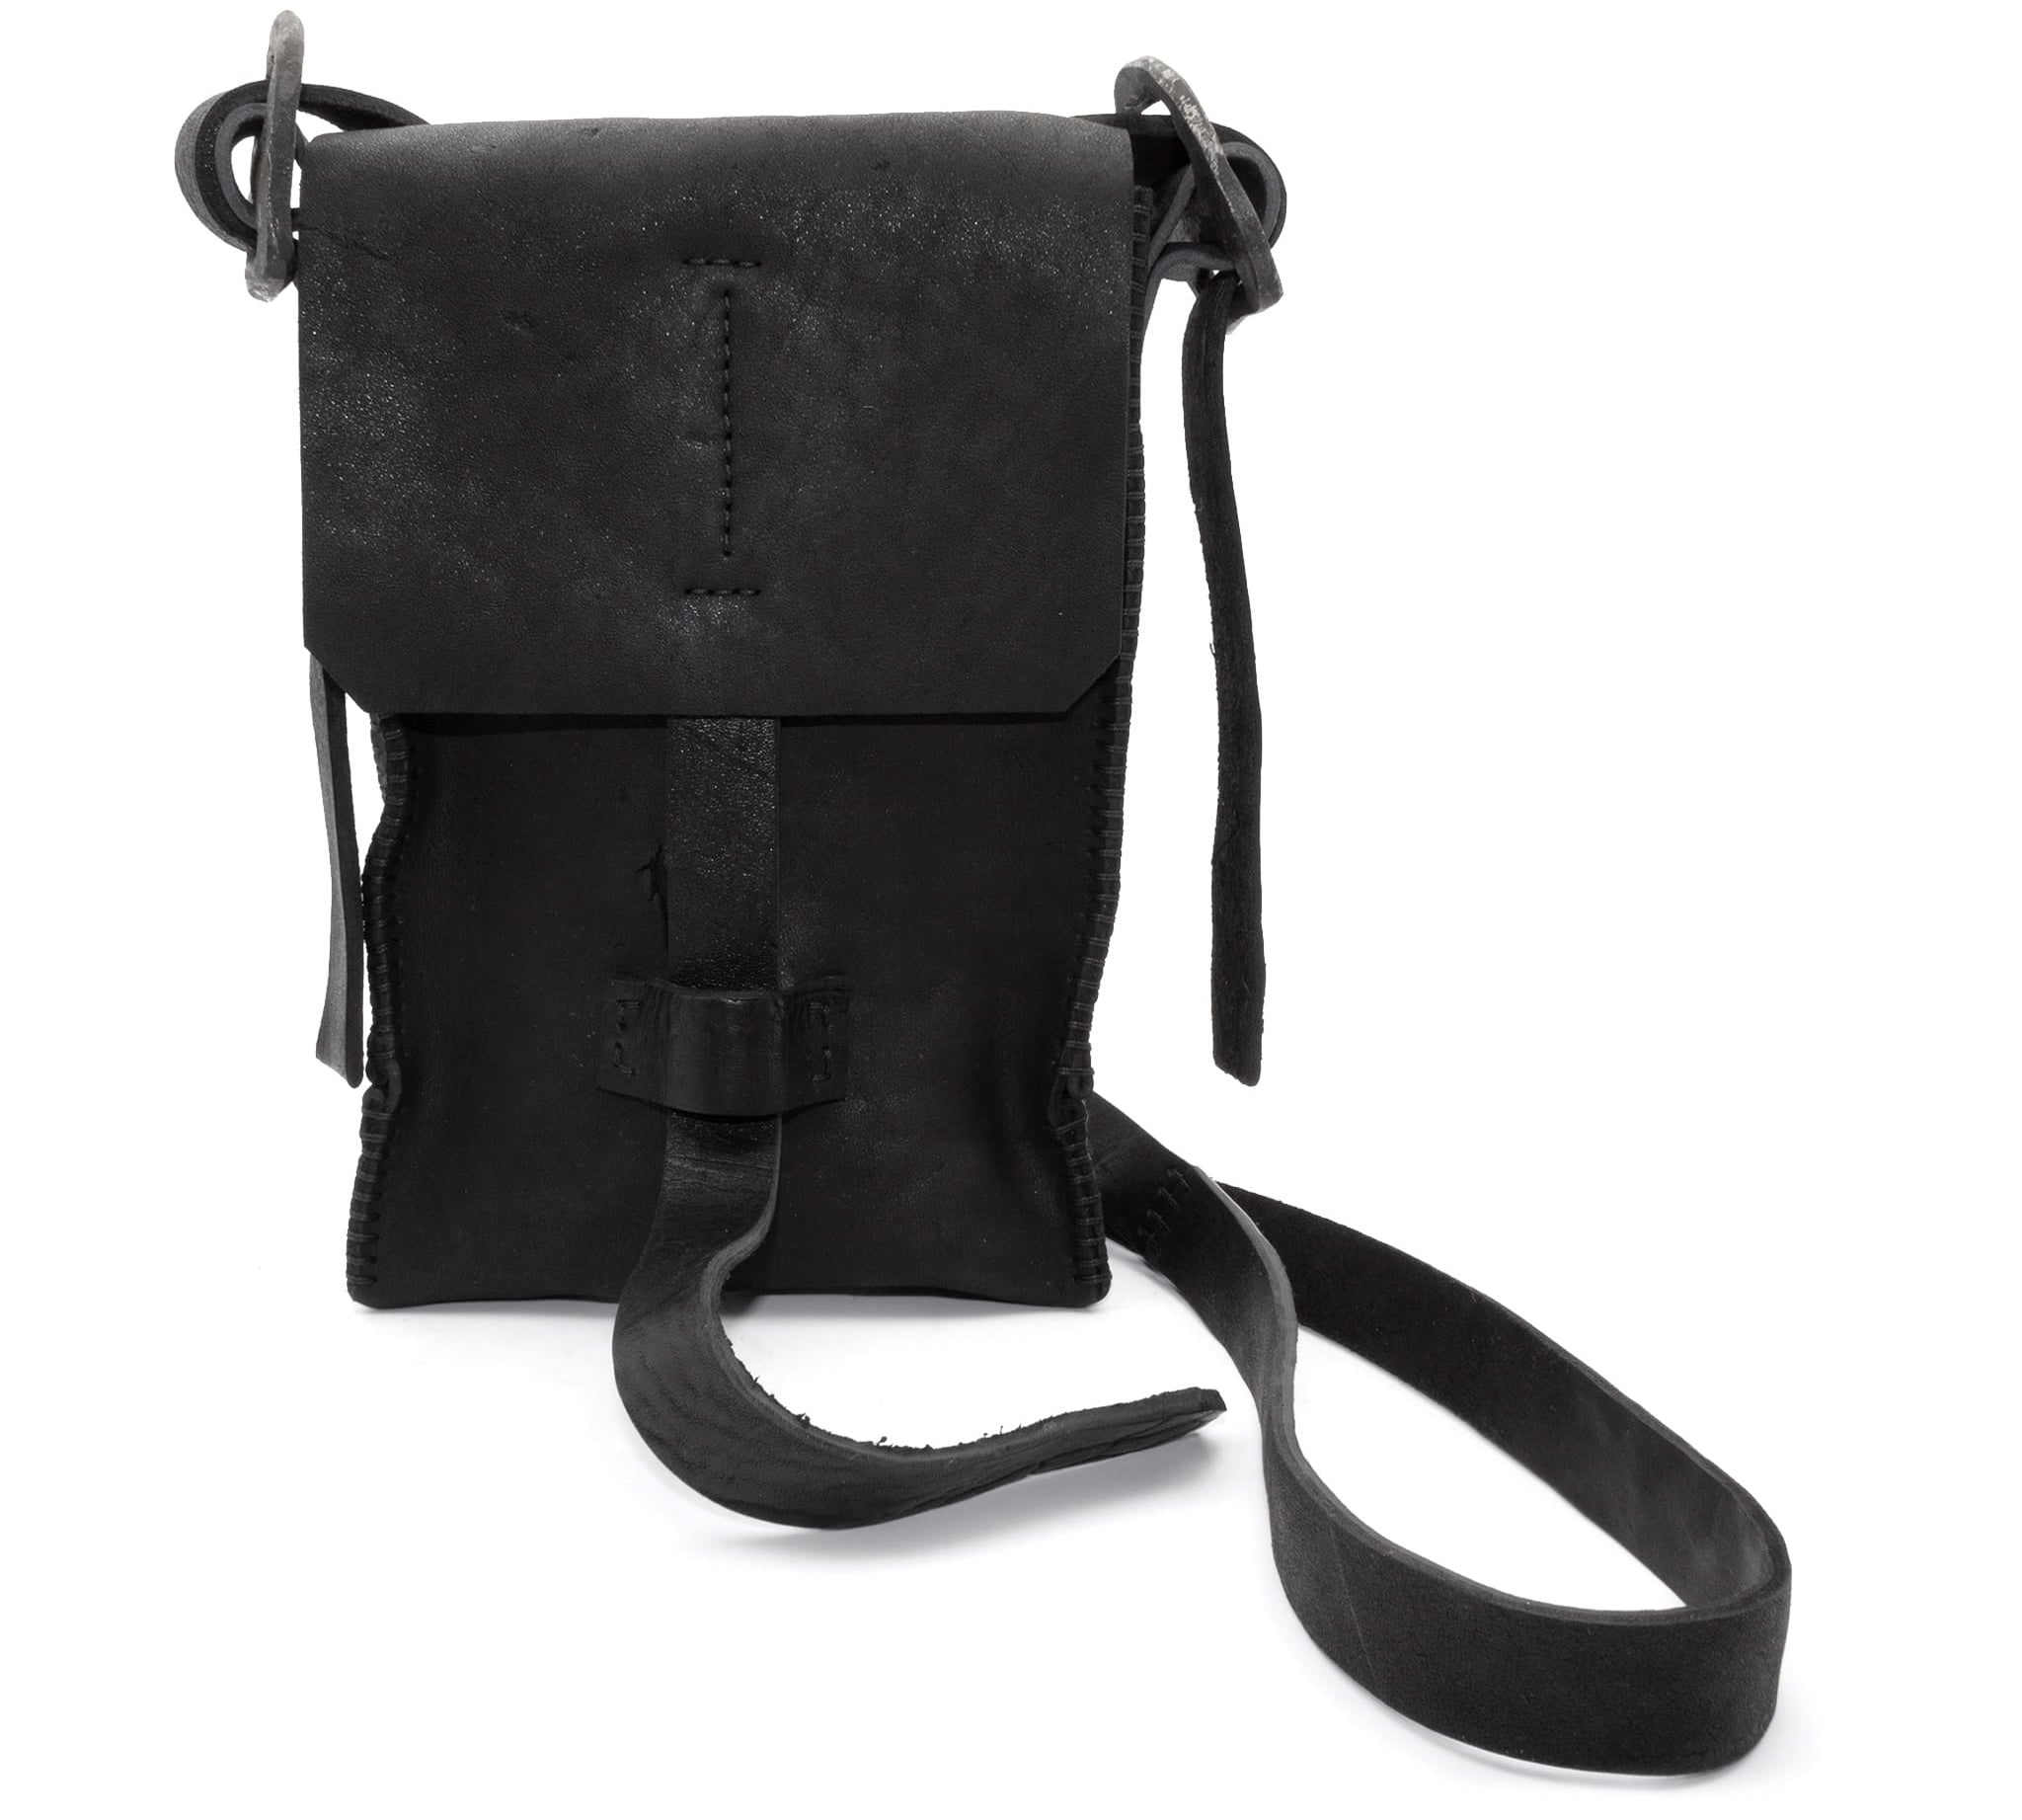 black washed culatta leather crossbody bag available to buy online at atelierskn.com. an independent designer offering a fastidious collection of avant garde leather bags and accessories.